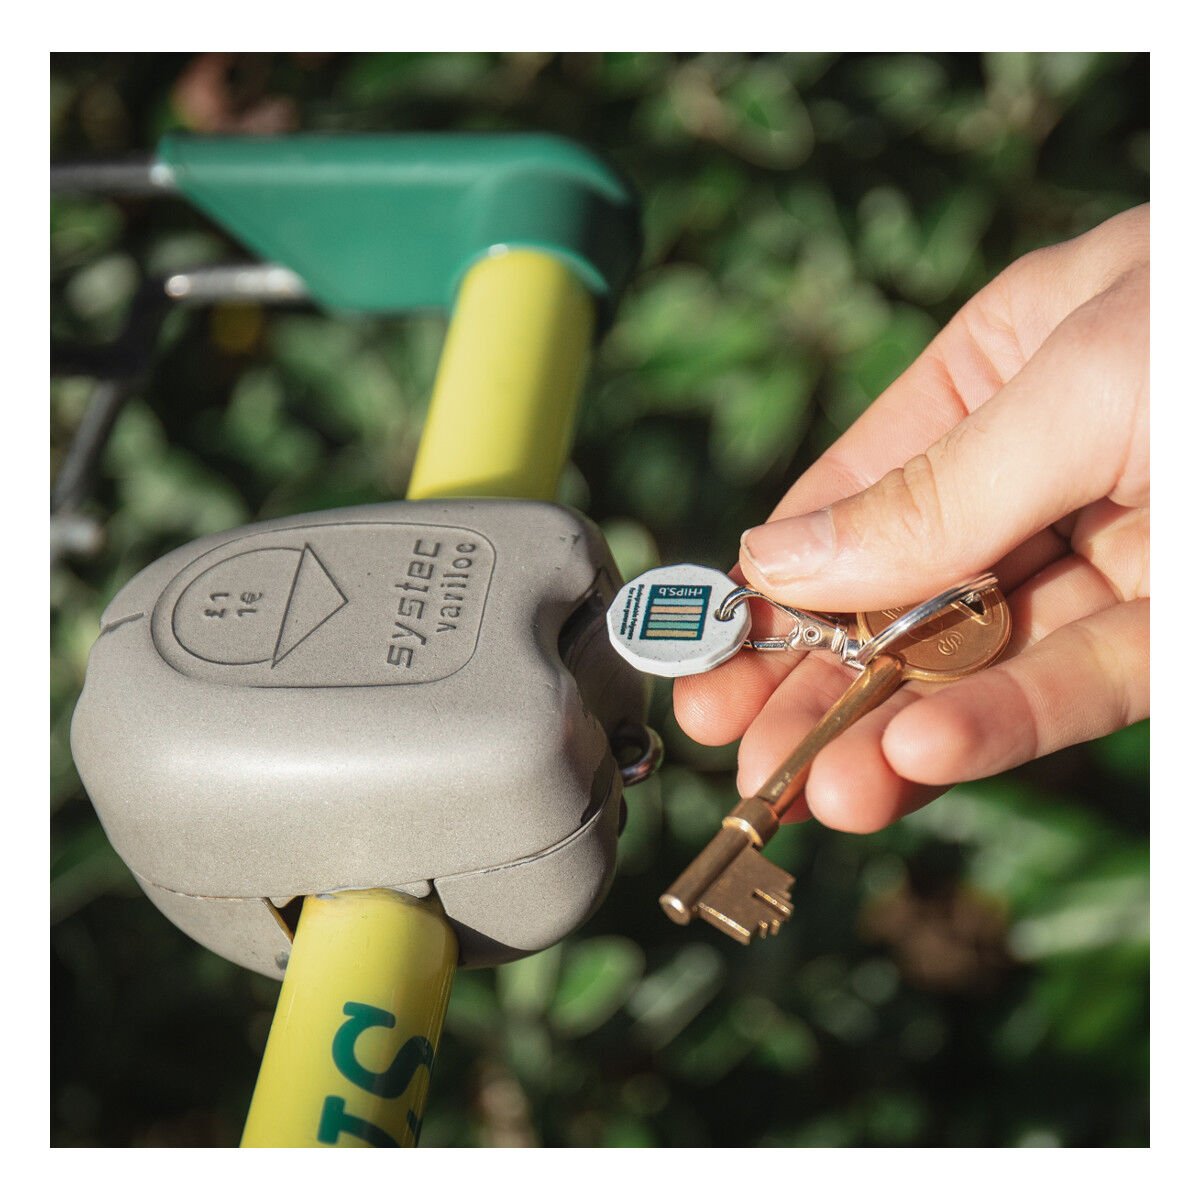 Recycled Plastic rHIPS Trolley Coin Keyring